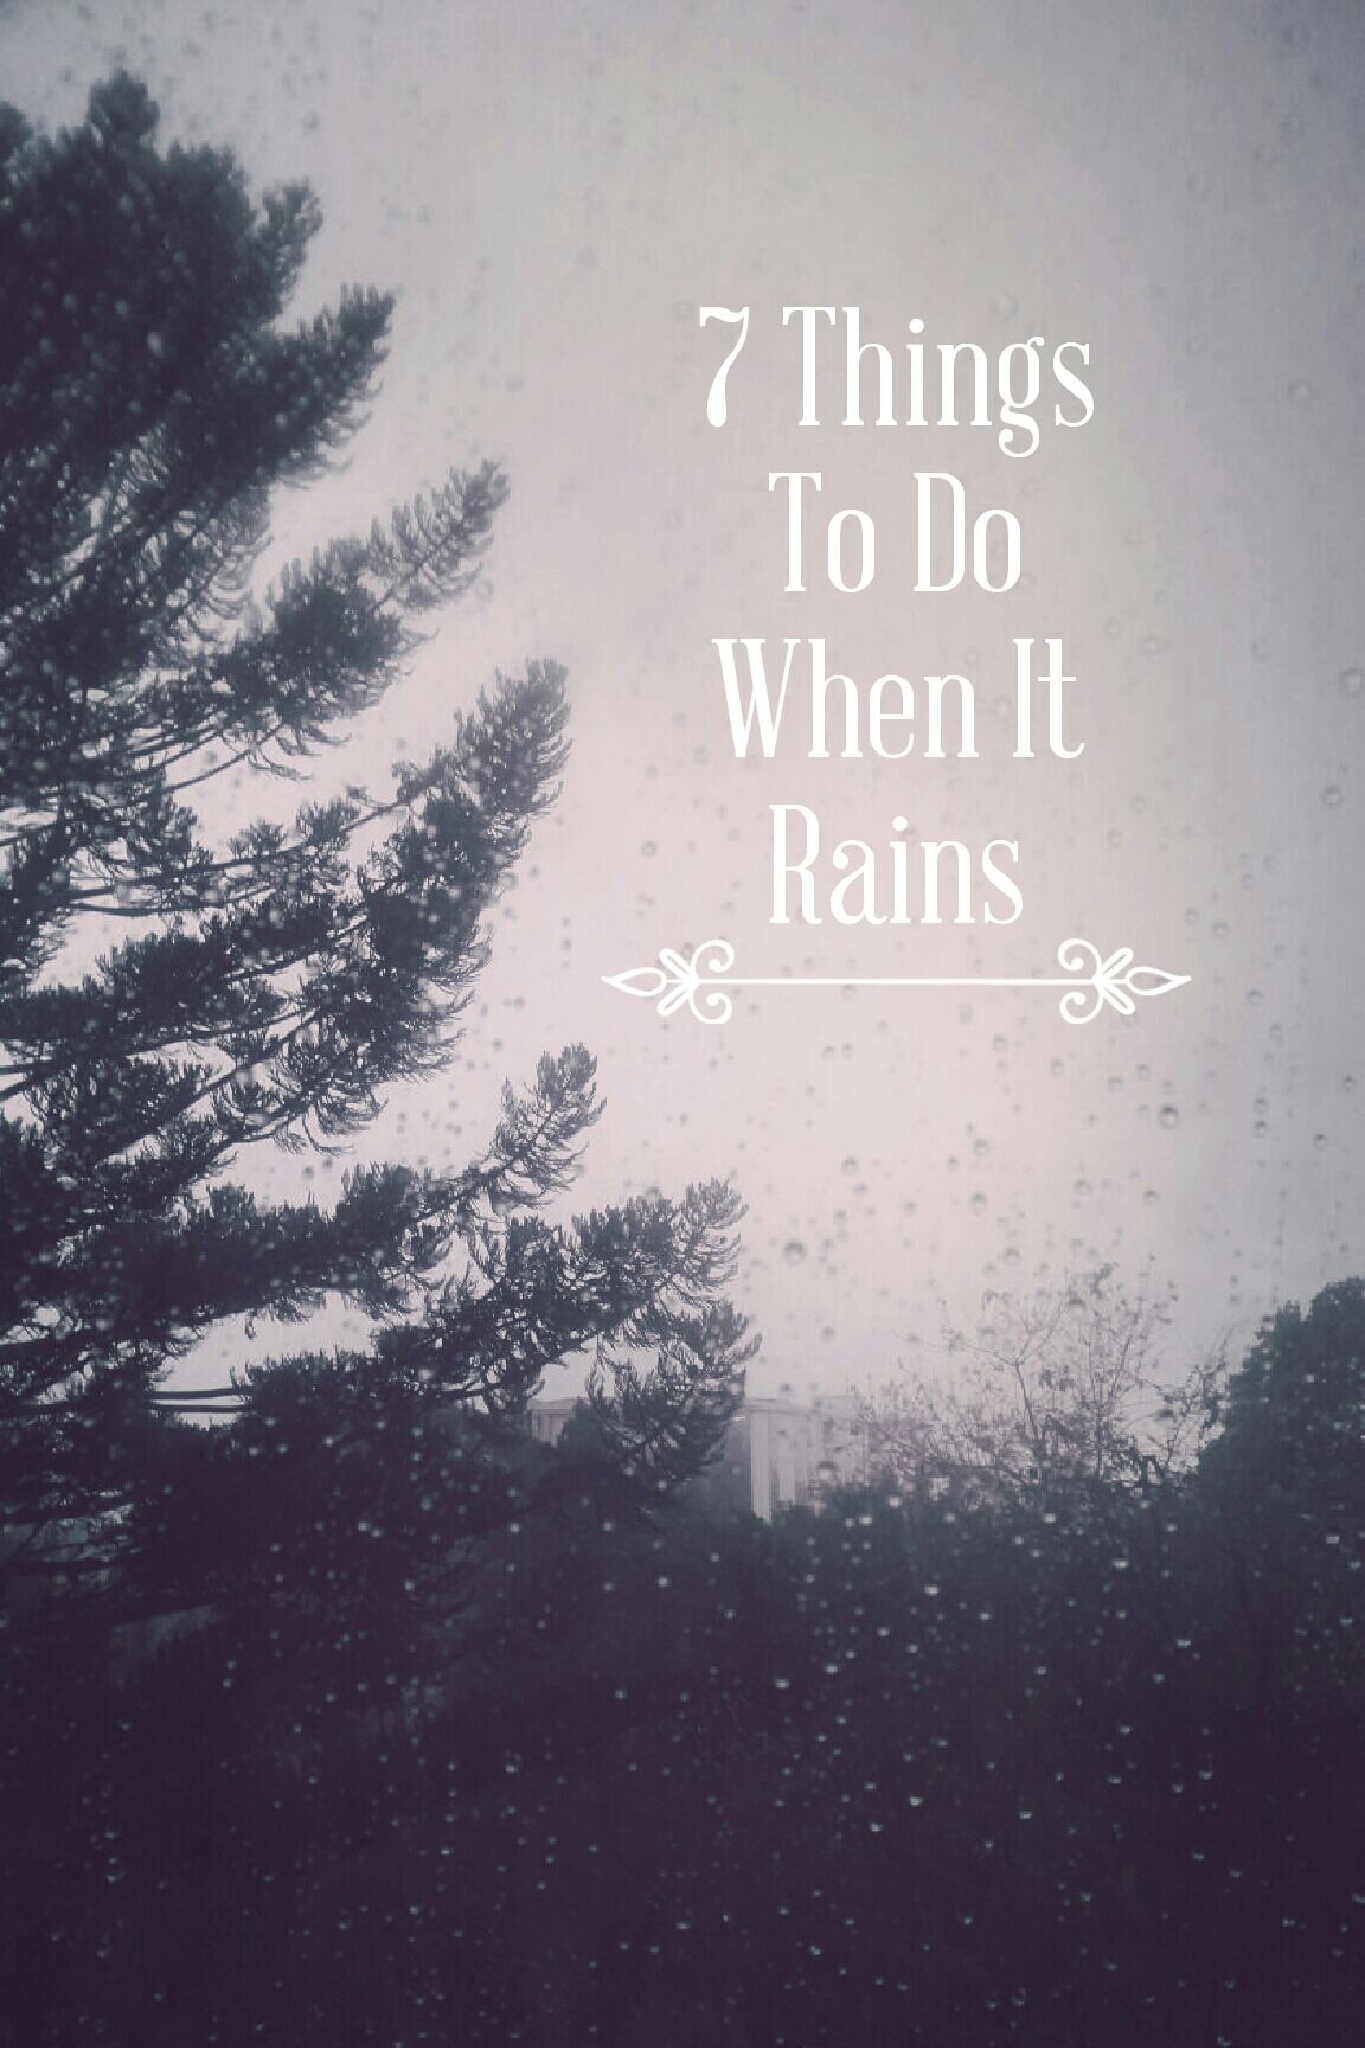 7 Things To Do When It Rains